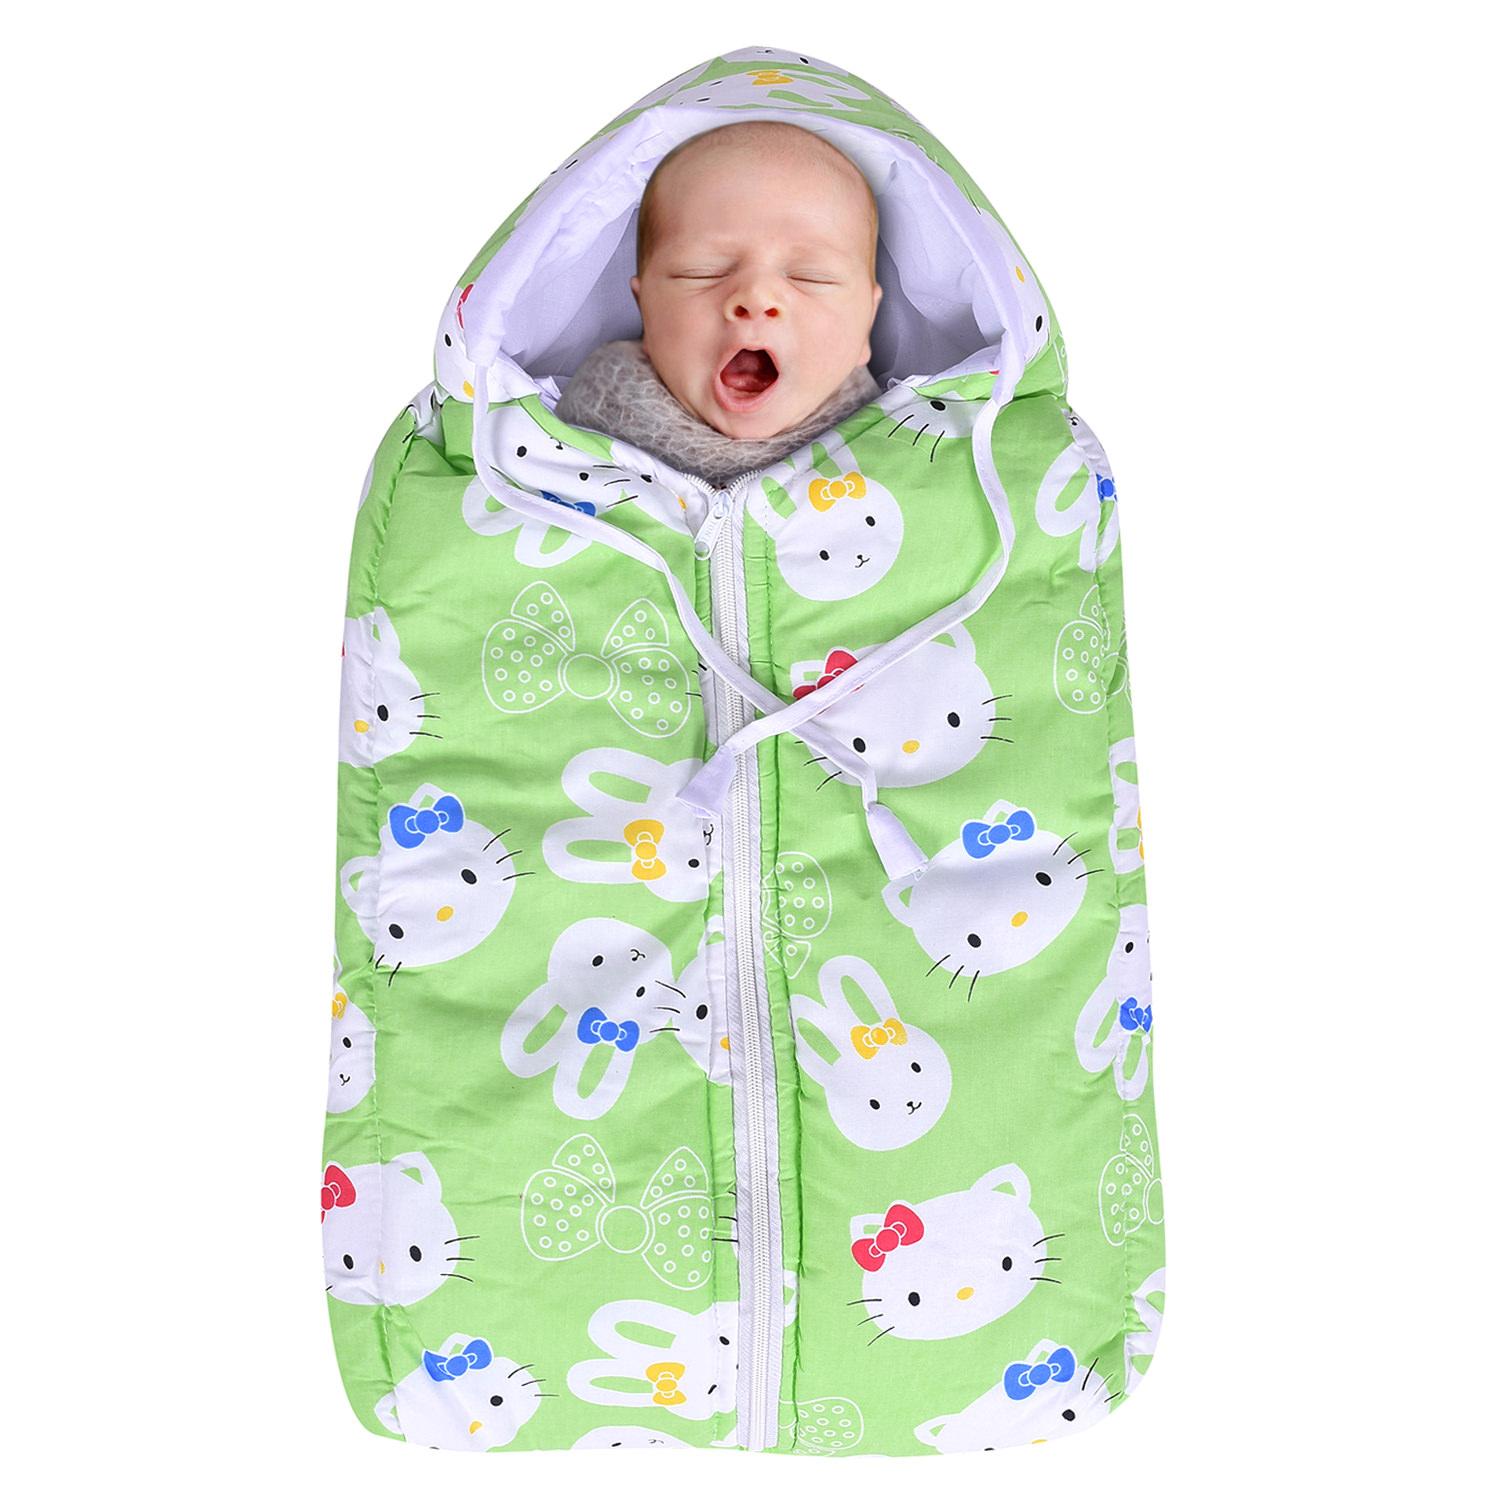 Mom's Home Baby Cotton Sleeping cum carrying Nest Bag -Green